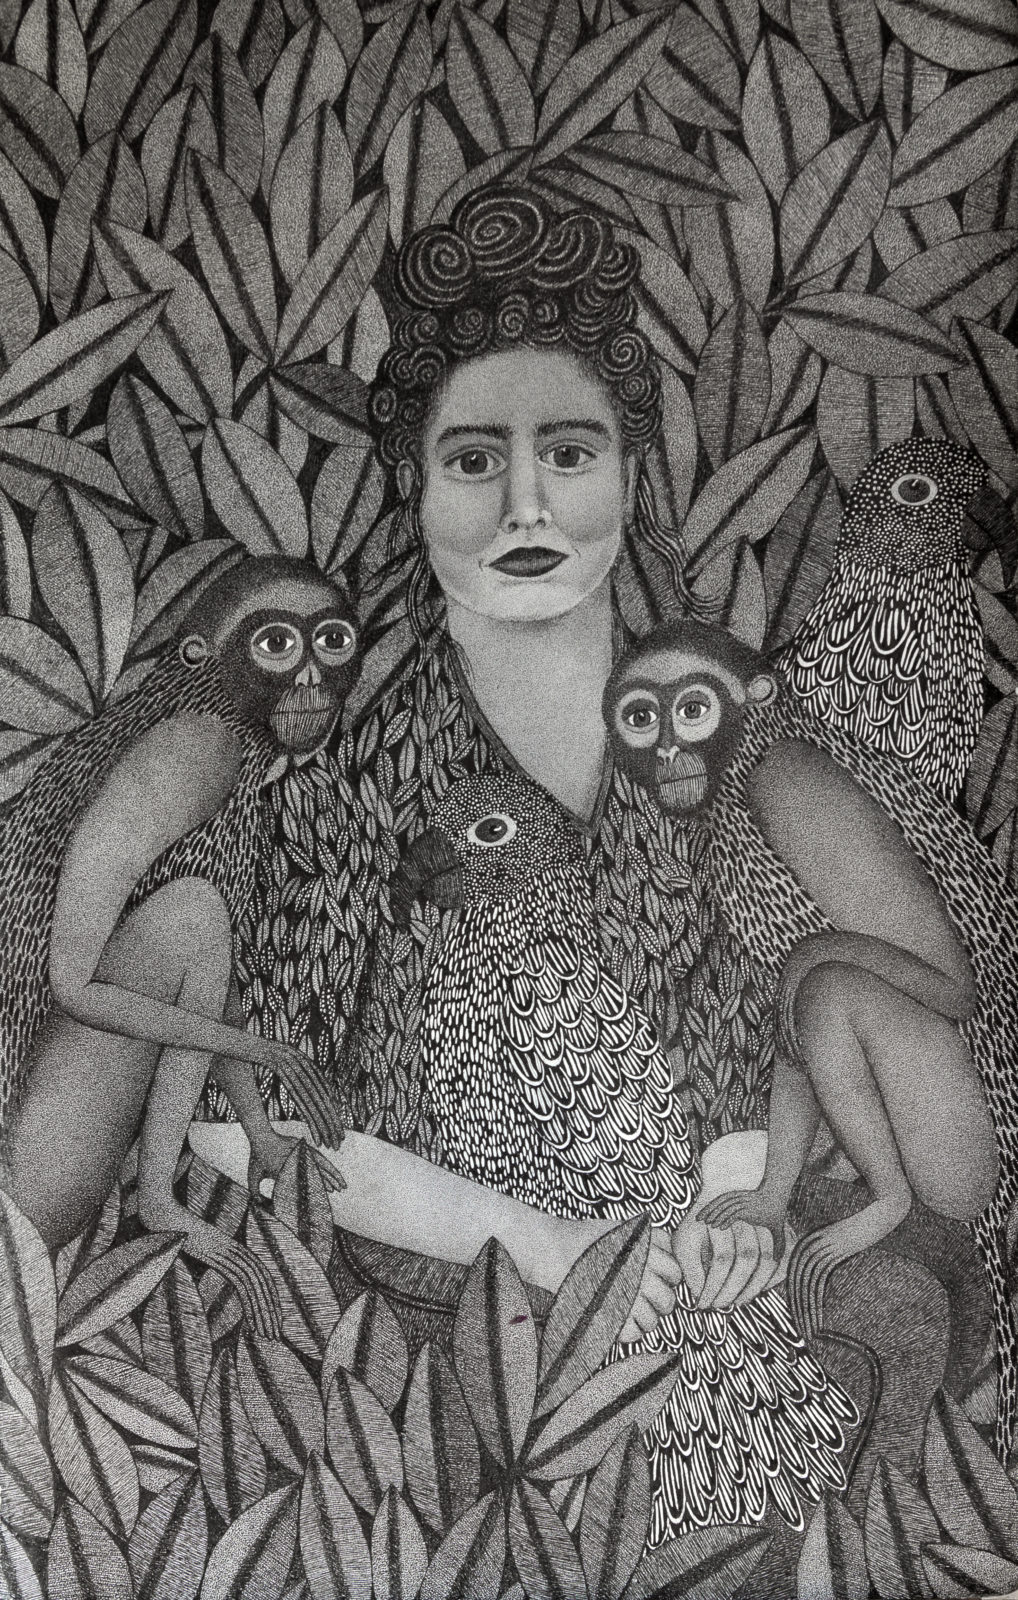 Self portrait with monkeys and parrots